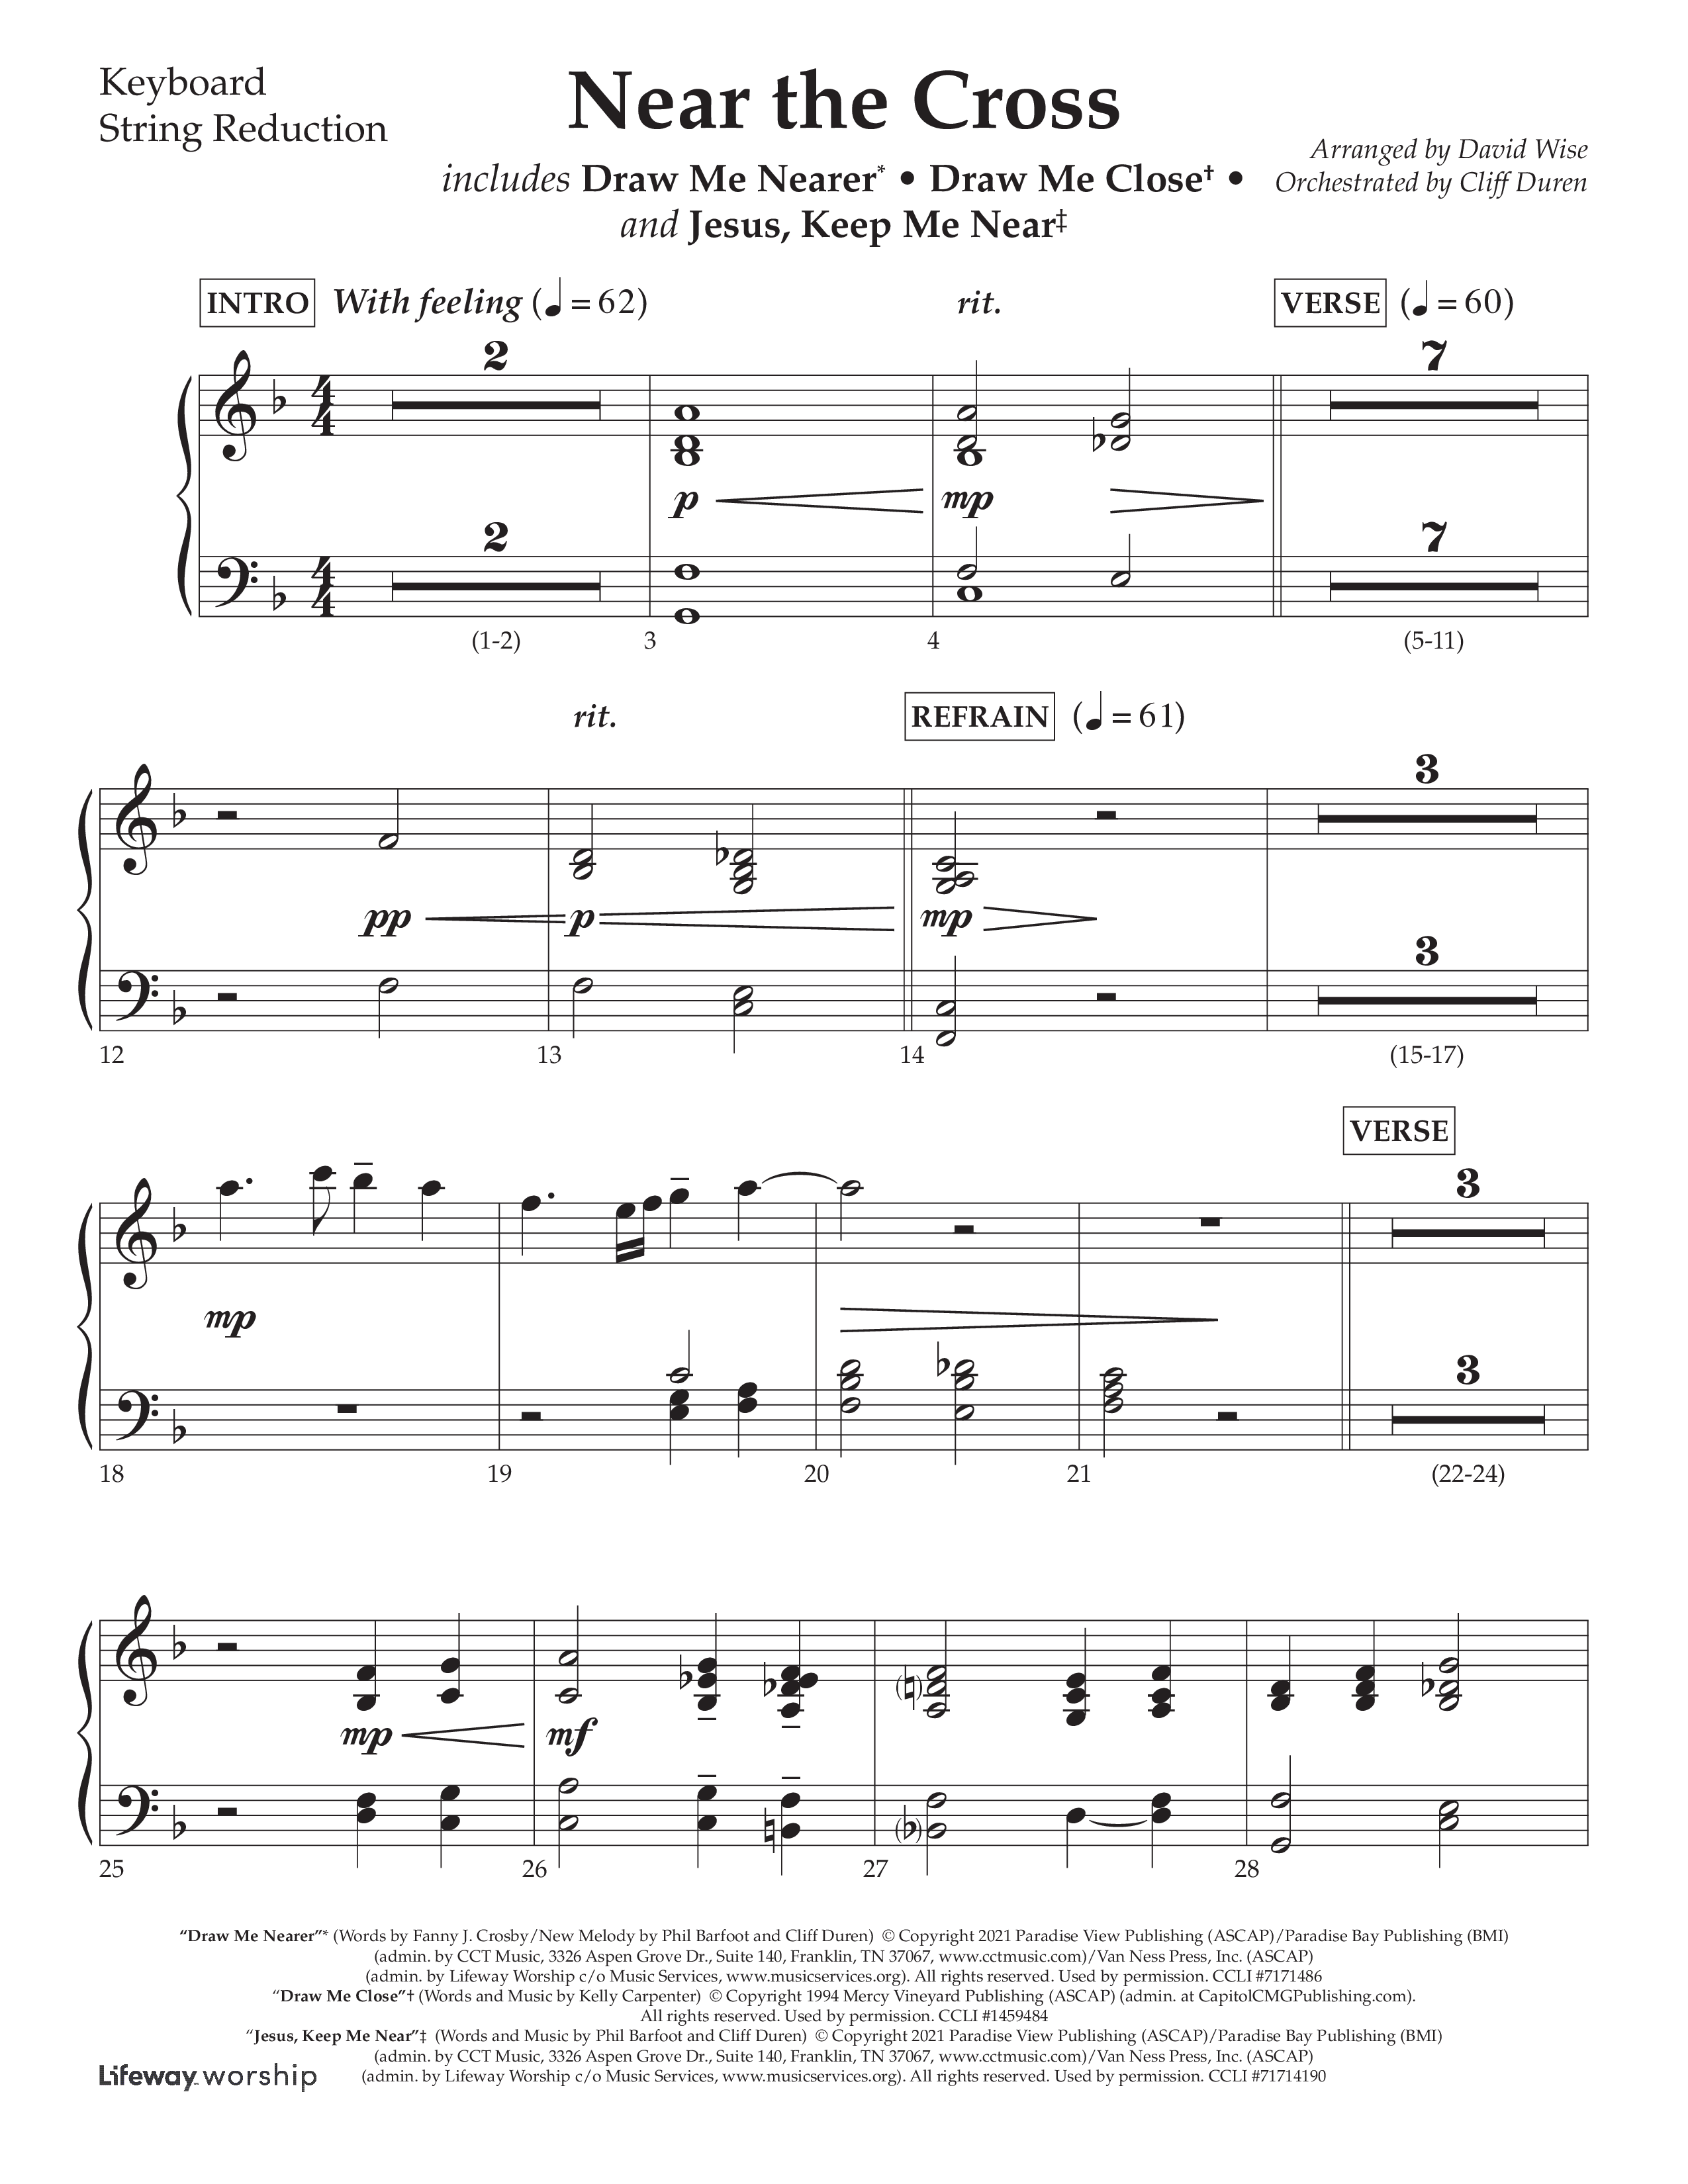 Near The Cross (Choral Anthem SATB) String Reduction (Lifeway Choral / Arr. David Wise / Orch. Cliff Duren)